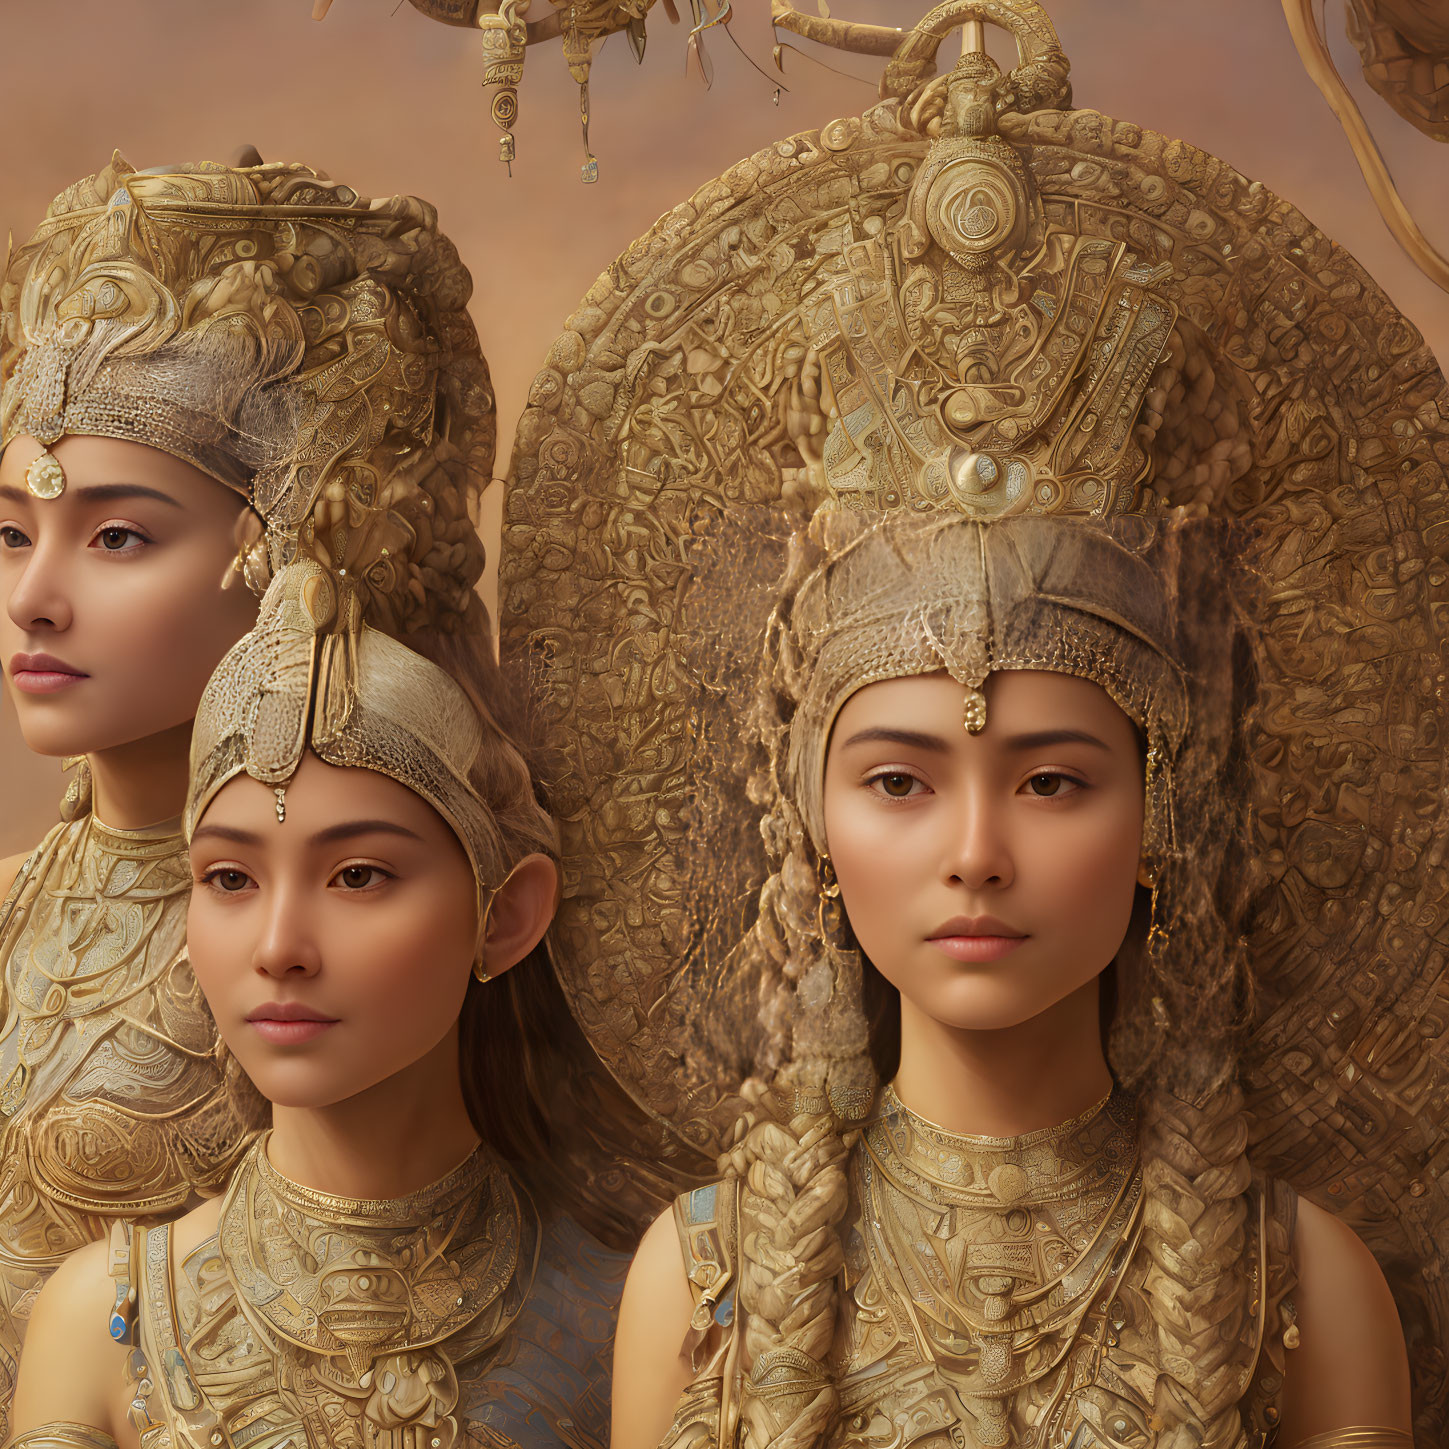 Three Women in Ornate Golden Headdresses and Armor on Matching Golden Backdrop